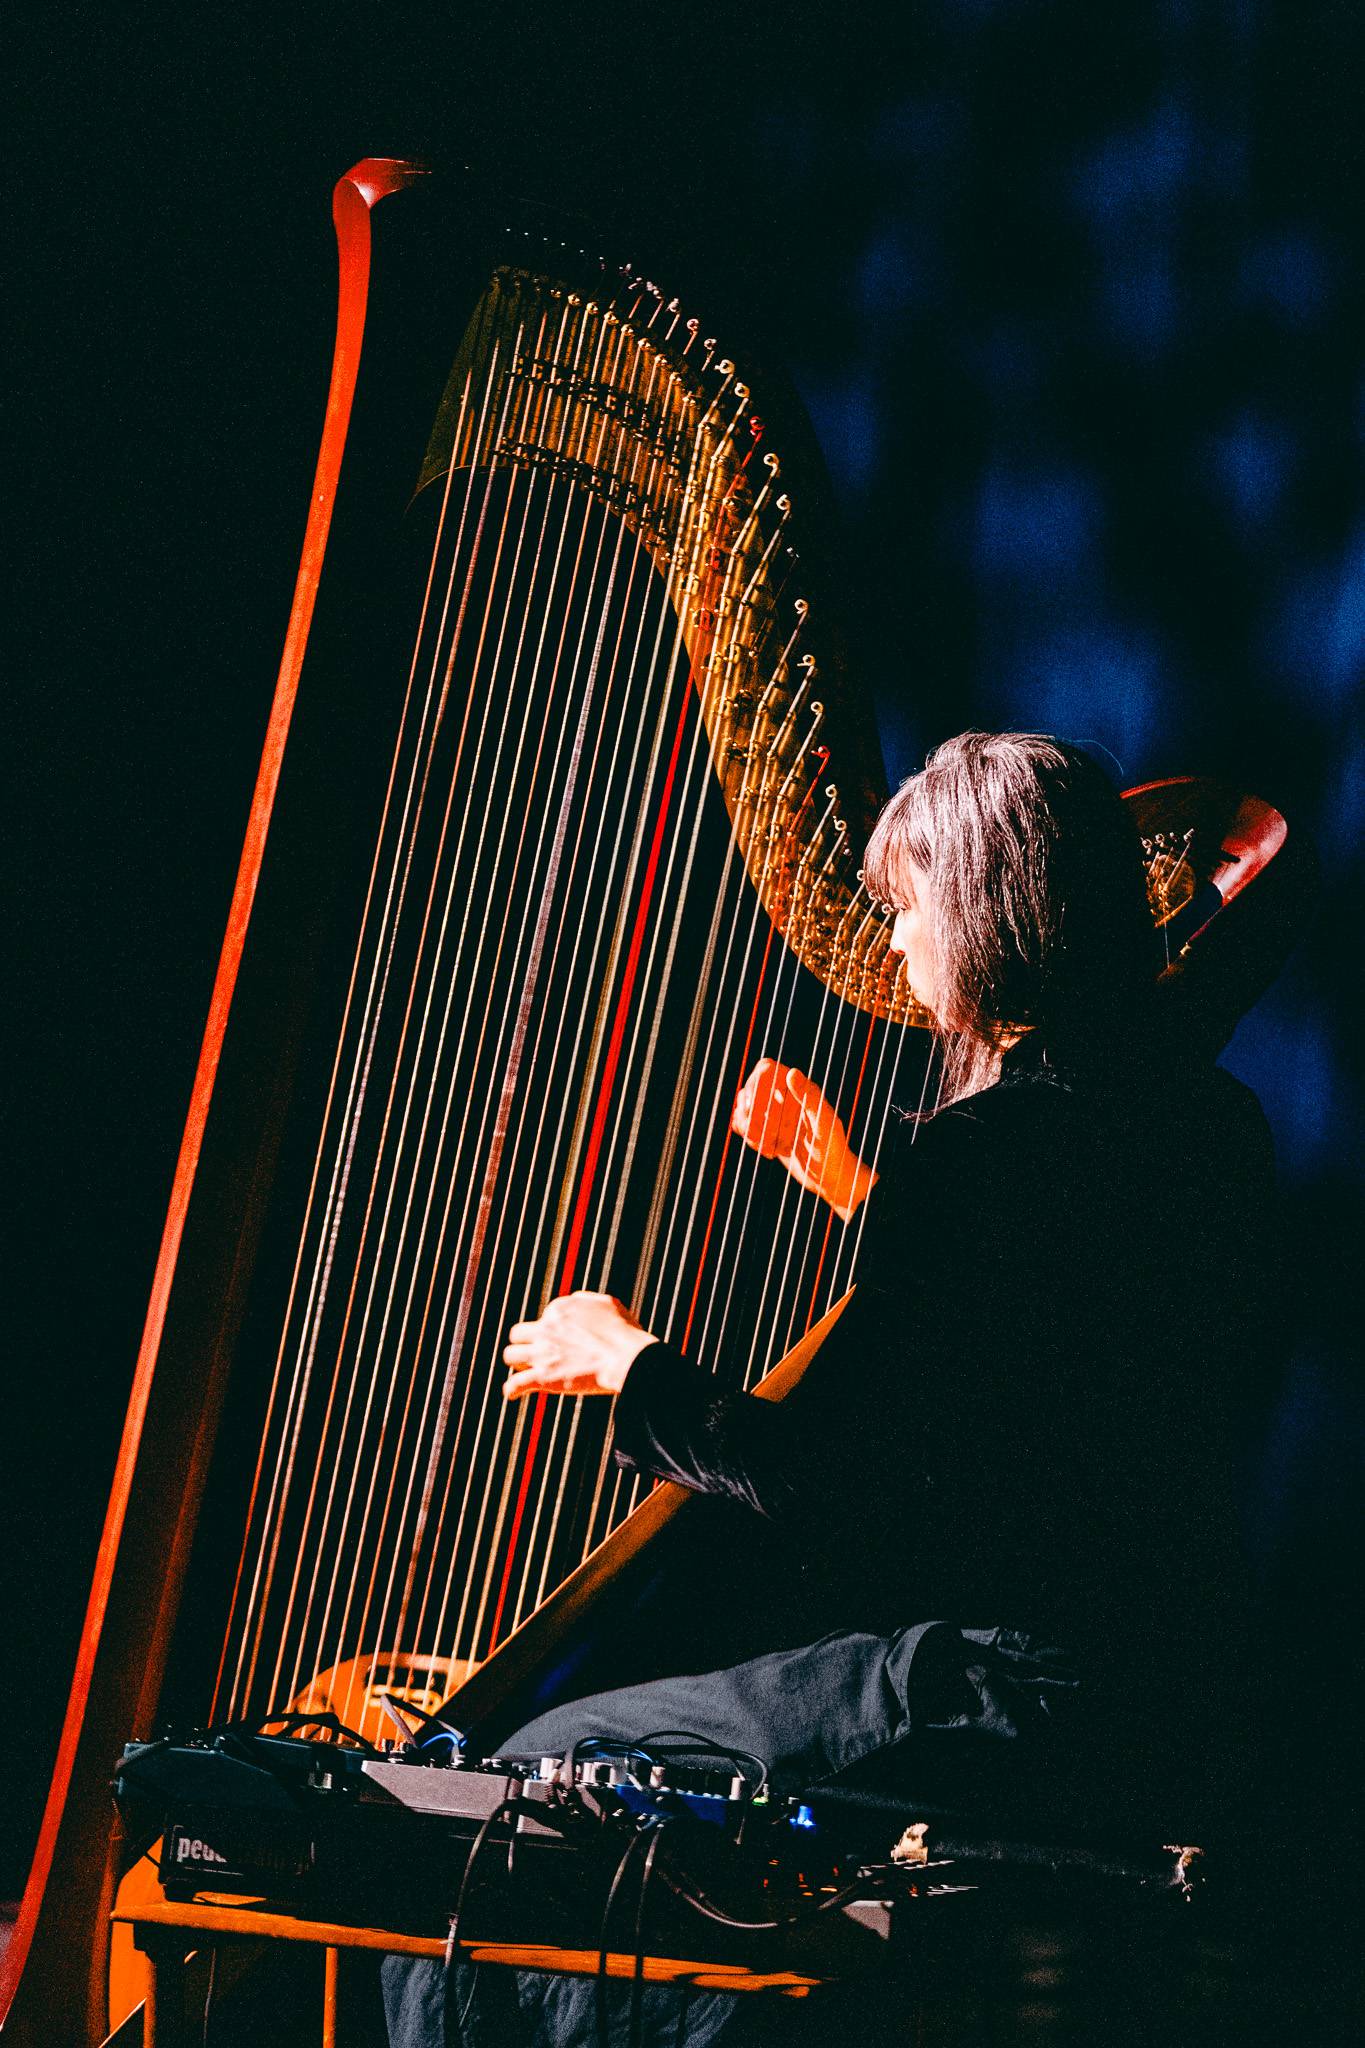 Nadah el Shazly performing at Riverside Theatre with a harp. Photo by Alyssa Leicht.